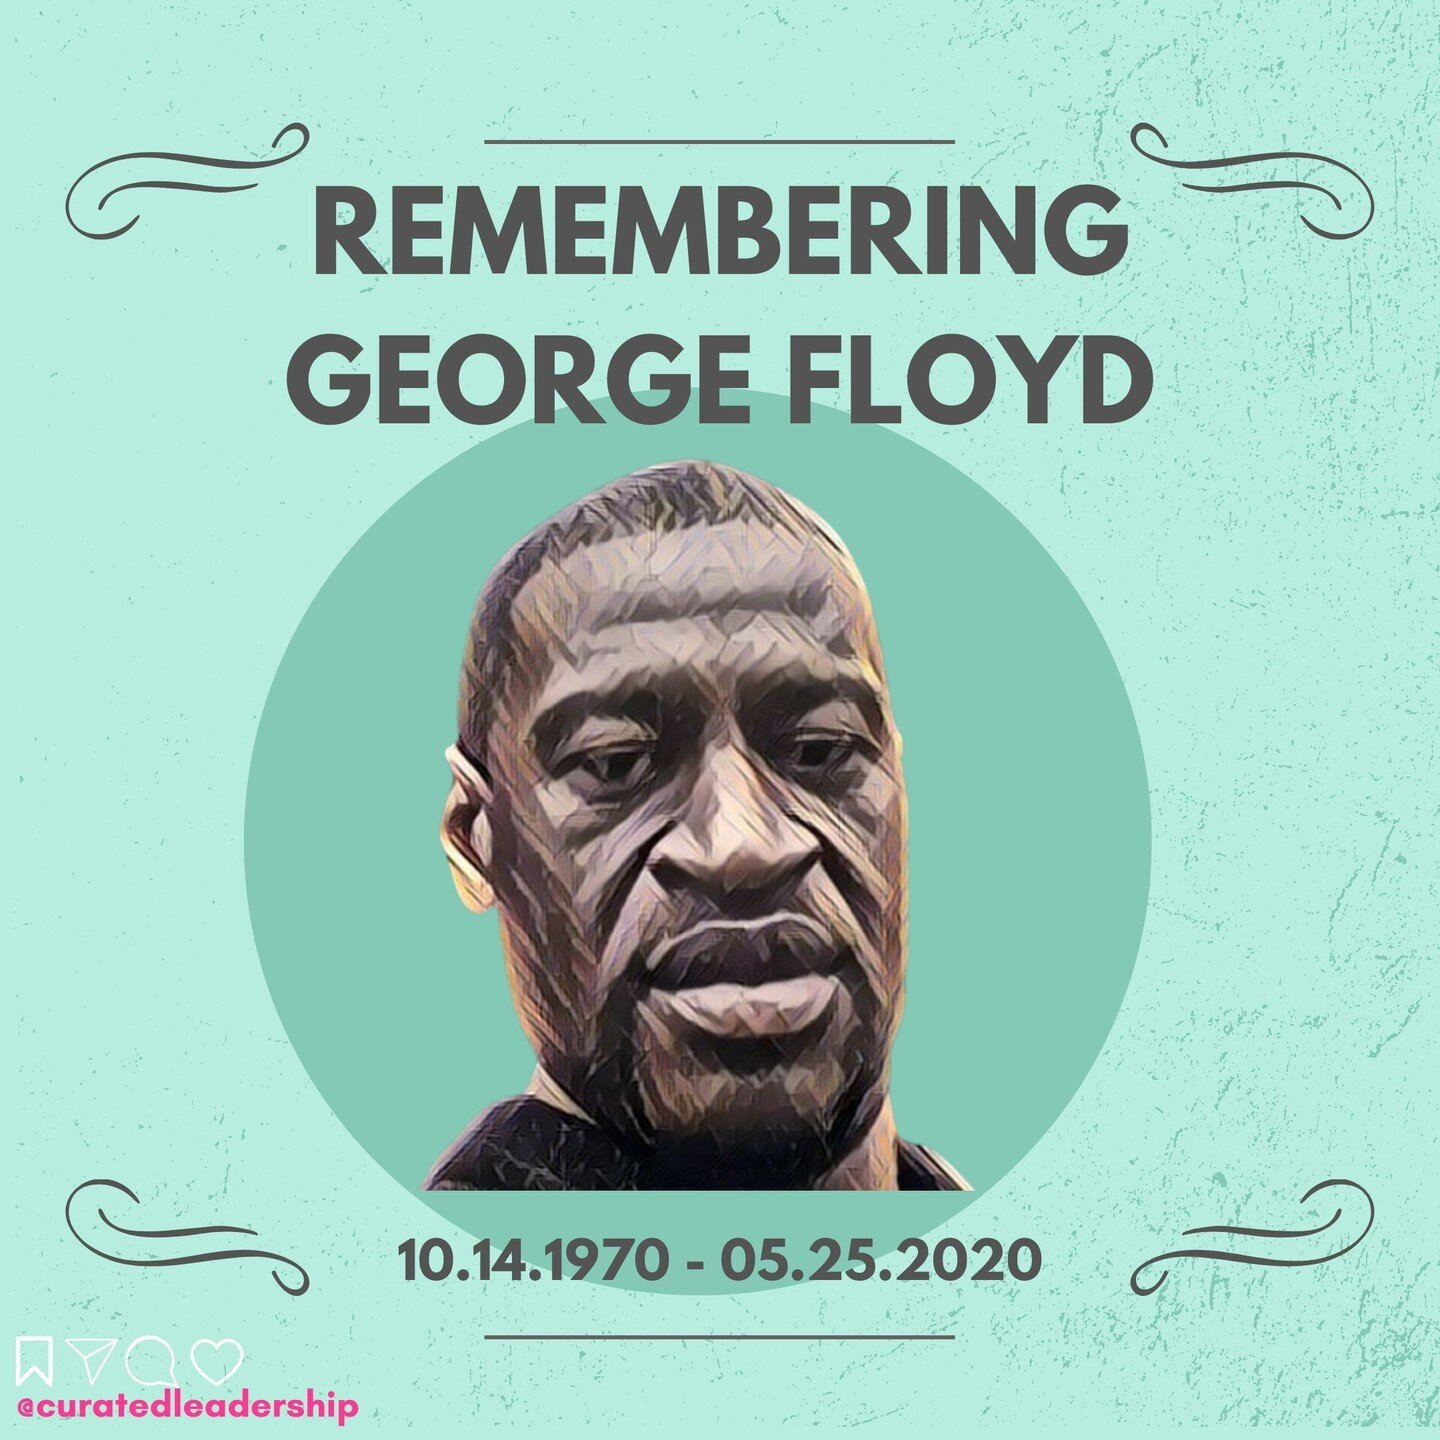 Two years ago today, George Floyd's murder at the hands of a police officer changed the world. His death sparked a renewed commitment to the fight against anti-Black racism and for a just and equal society. Today, the Black community continues to fac